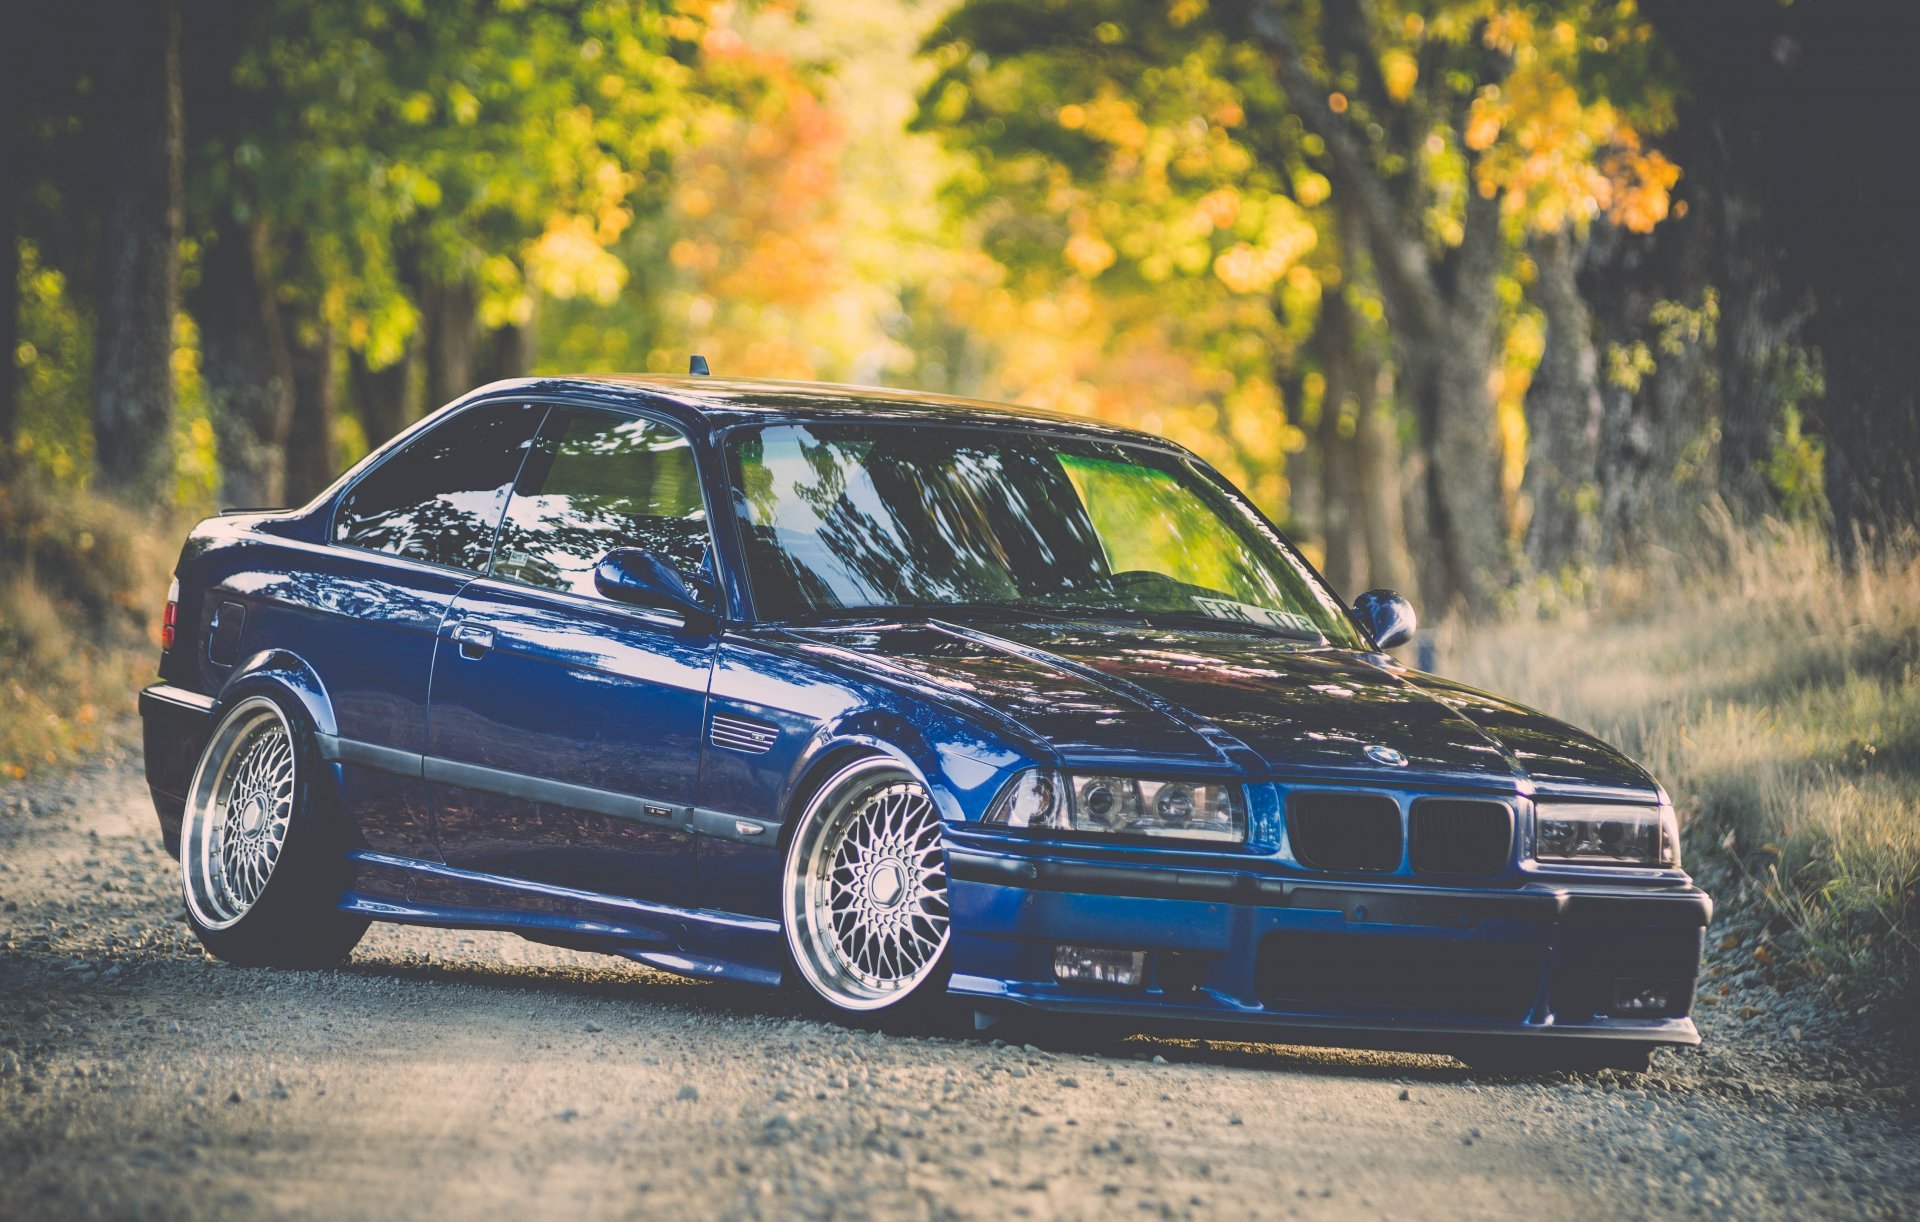 Free Download Bmw E36 M3 Bmw Tuning Stance Blue Hd Wallpaper 1920x1222 For Your Desktop Mobile Tablet Explore 73 E36 M3 Wallpaper Bmw E30 Wallpaper Bmw M3 E46 Wallpaper